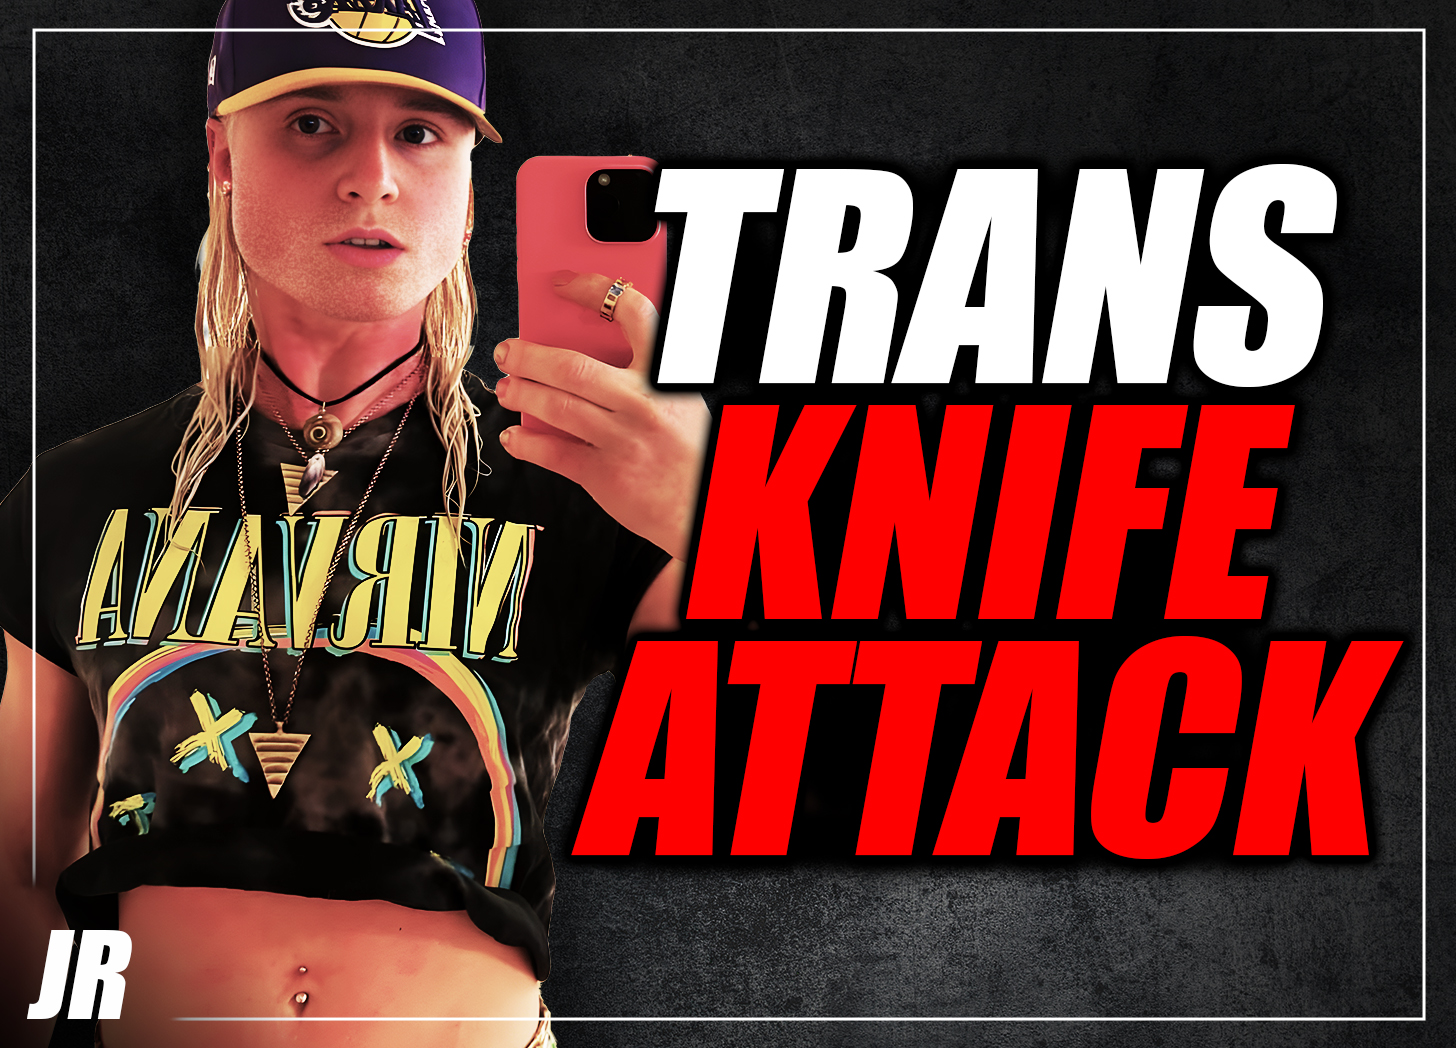 Exclusive: Crazed transsexual arrested for unhinged knife attack on young girls